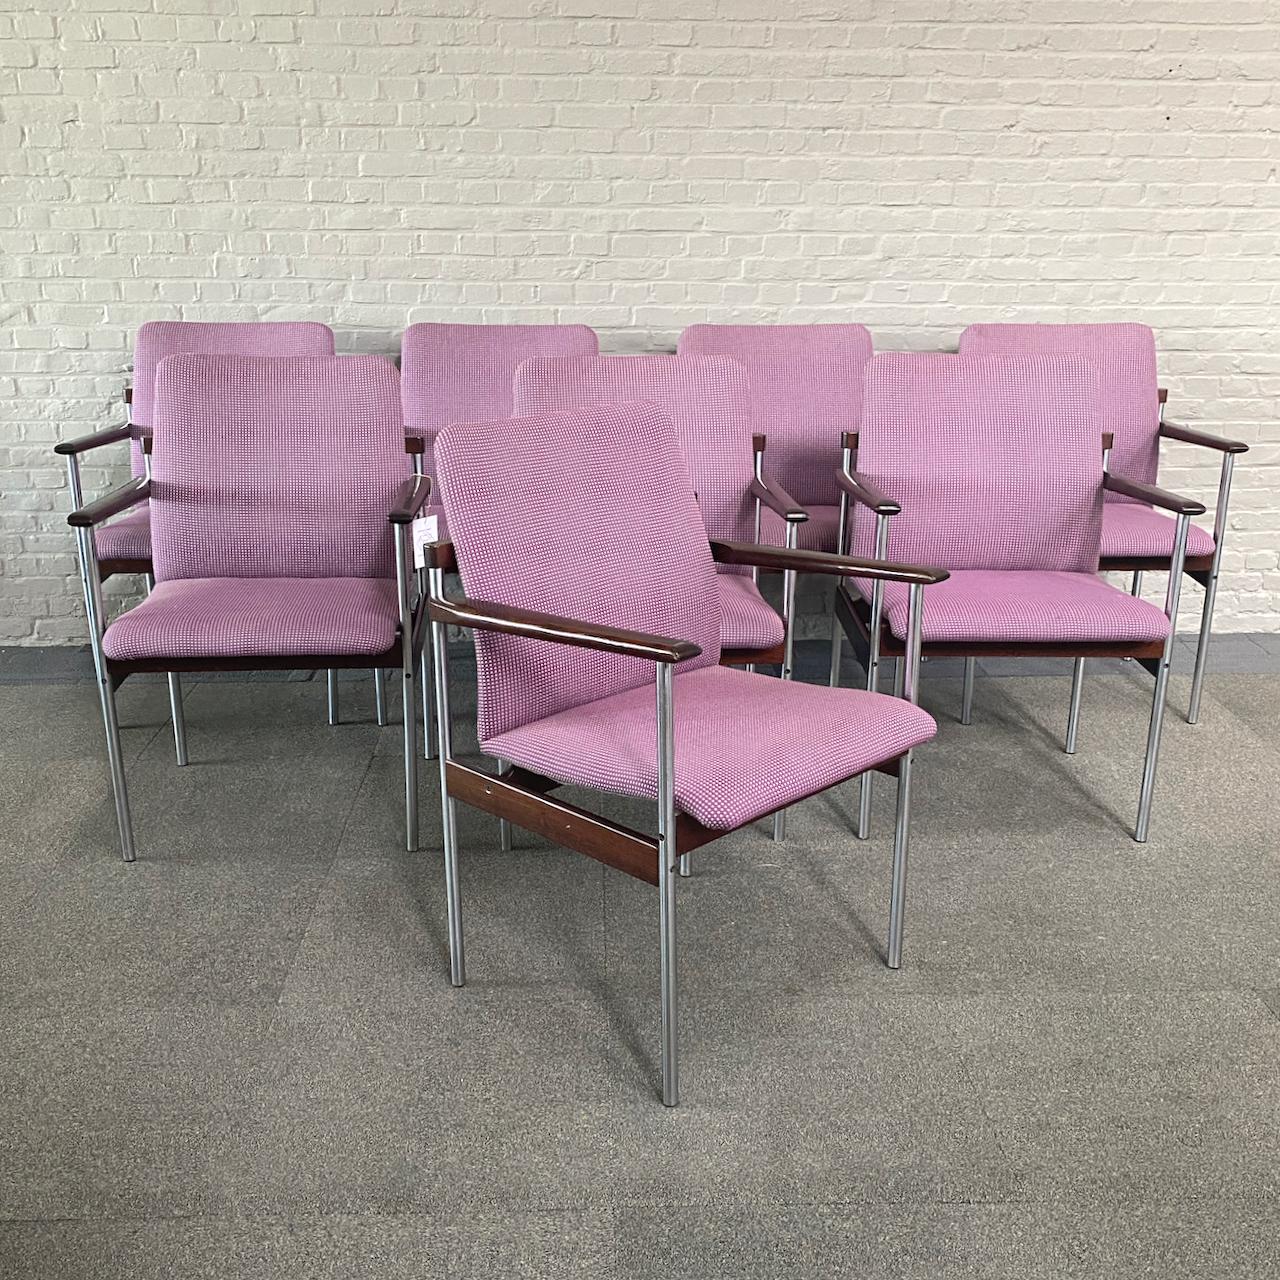 Set of 8 Thereca rosewood dining chairs

Designed by Sven Ivar Dysthe
Made in the Netherlands
1960's-1970's
Original fabric purple & off-white
Stainless steel frame
Rosewood armrests, front - back & side panels


Condition:
Overall the chairs are in